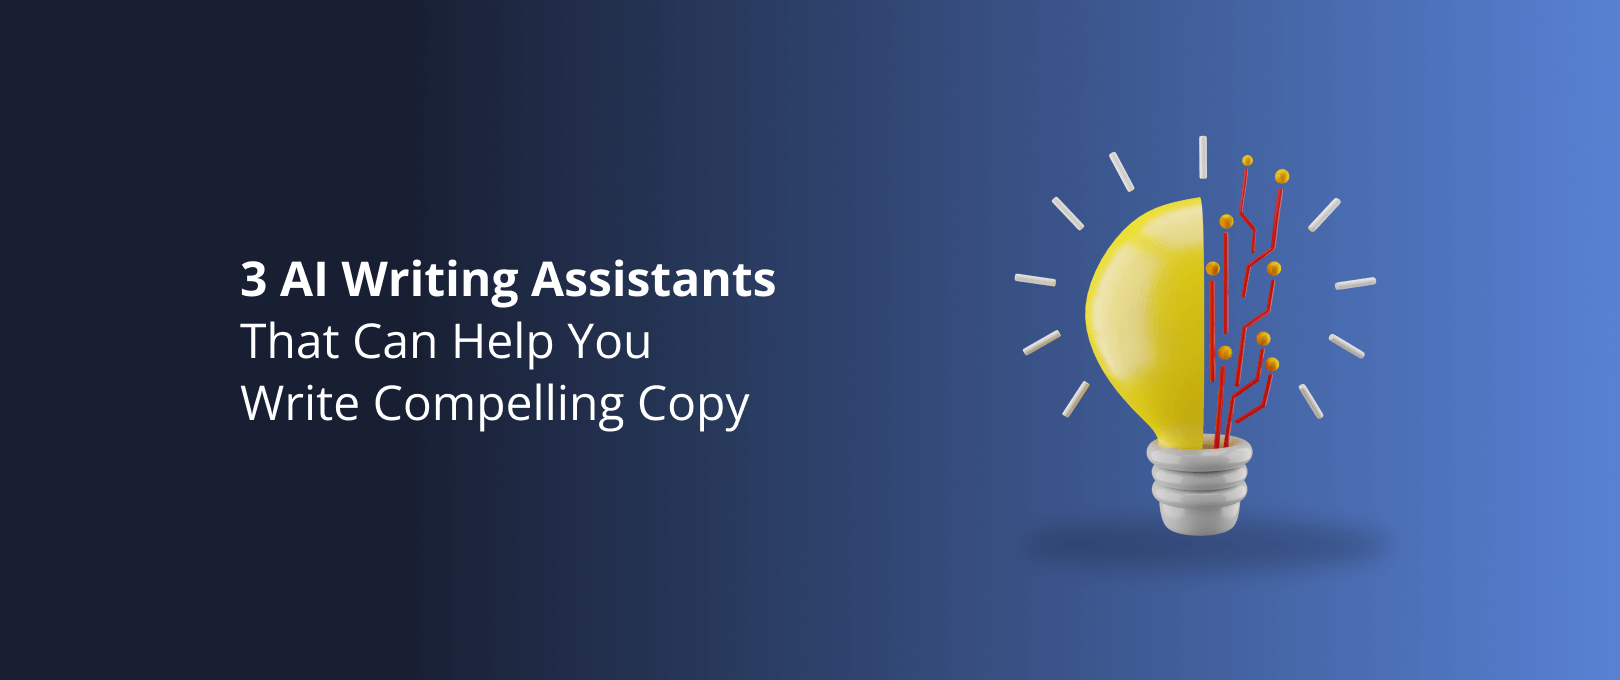 3-AI-Writing-Assistants-That-Can-Help-You-Write-Compelling-Copy.png